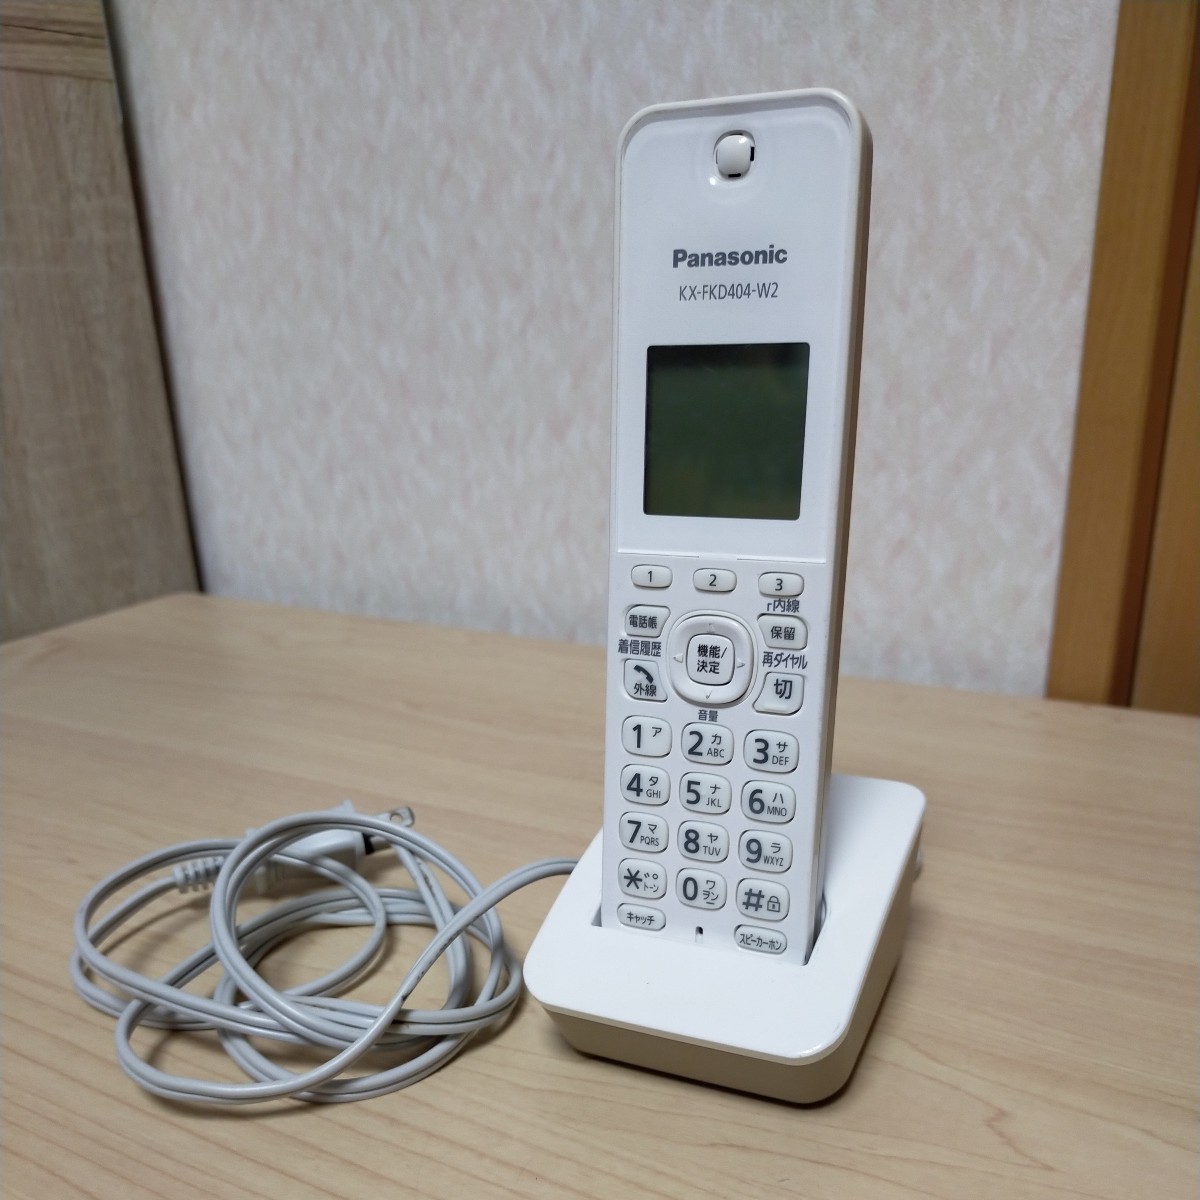  free shipping prompt decision Panasonic extension for cordless handset KX-FKD404-W2 exclusive use with charger .Panasonic parent machine .. extension verification, inside line telephone call verification settled ②